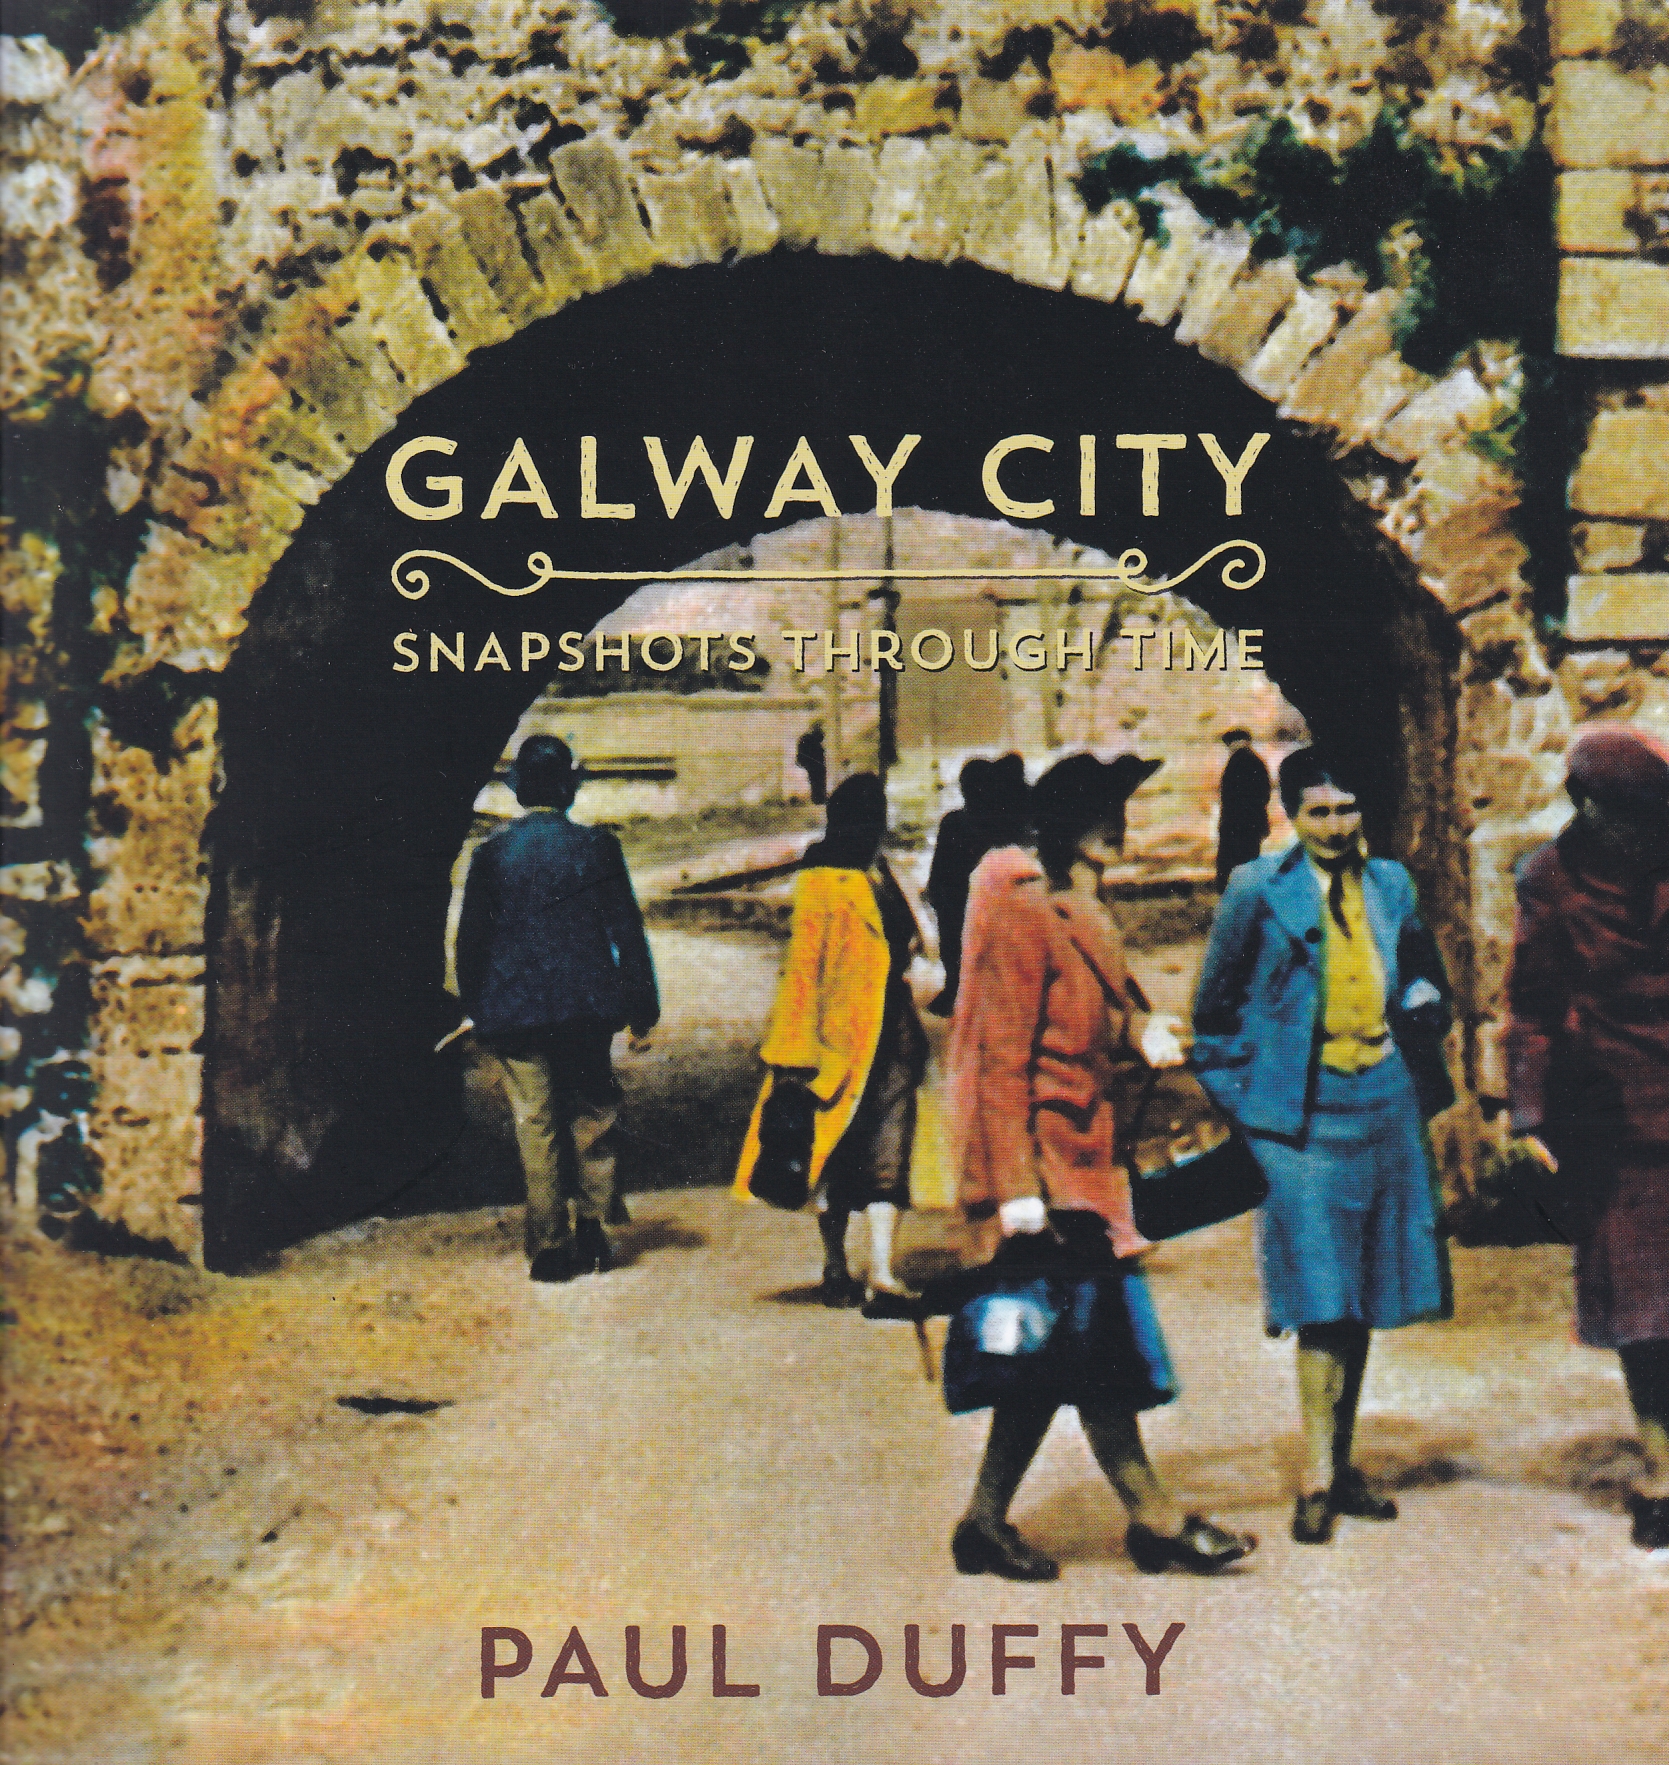 Galway City: Snapshots Through Time by Paul Duffy